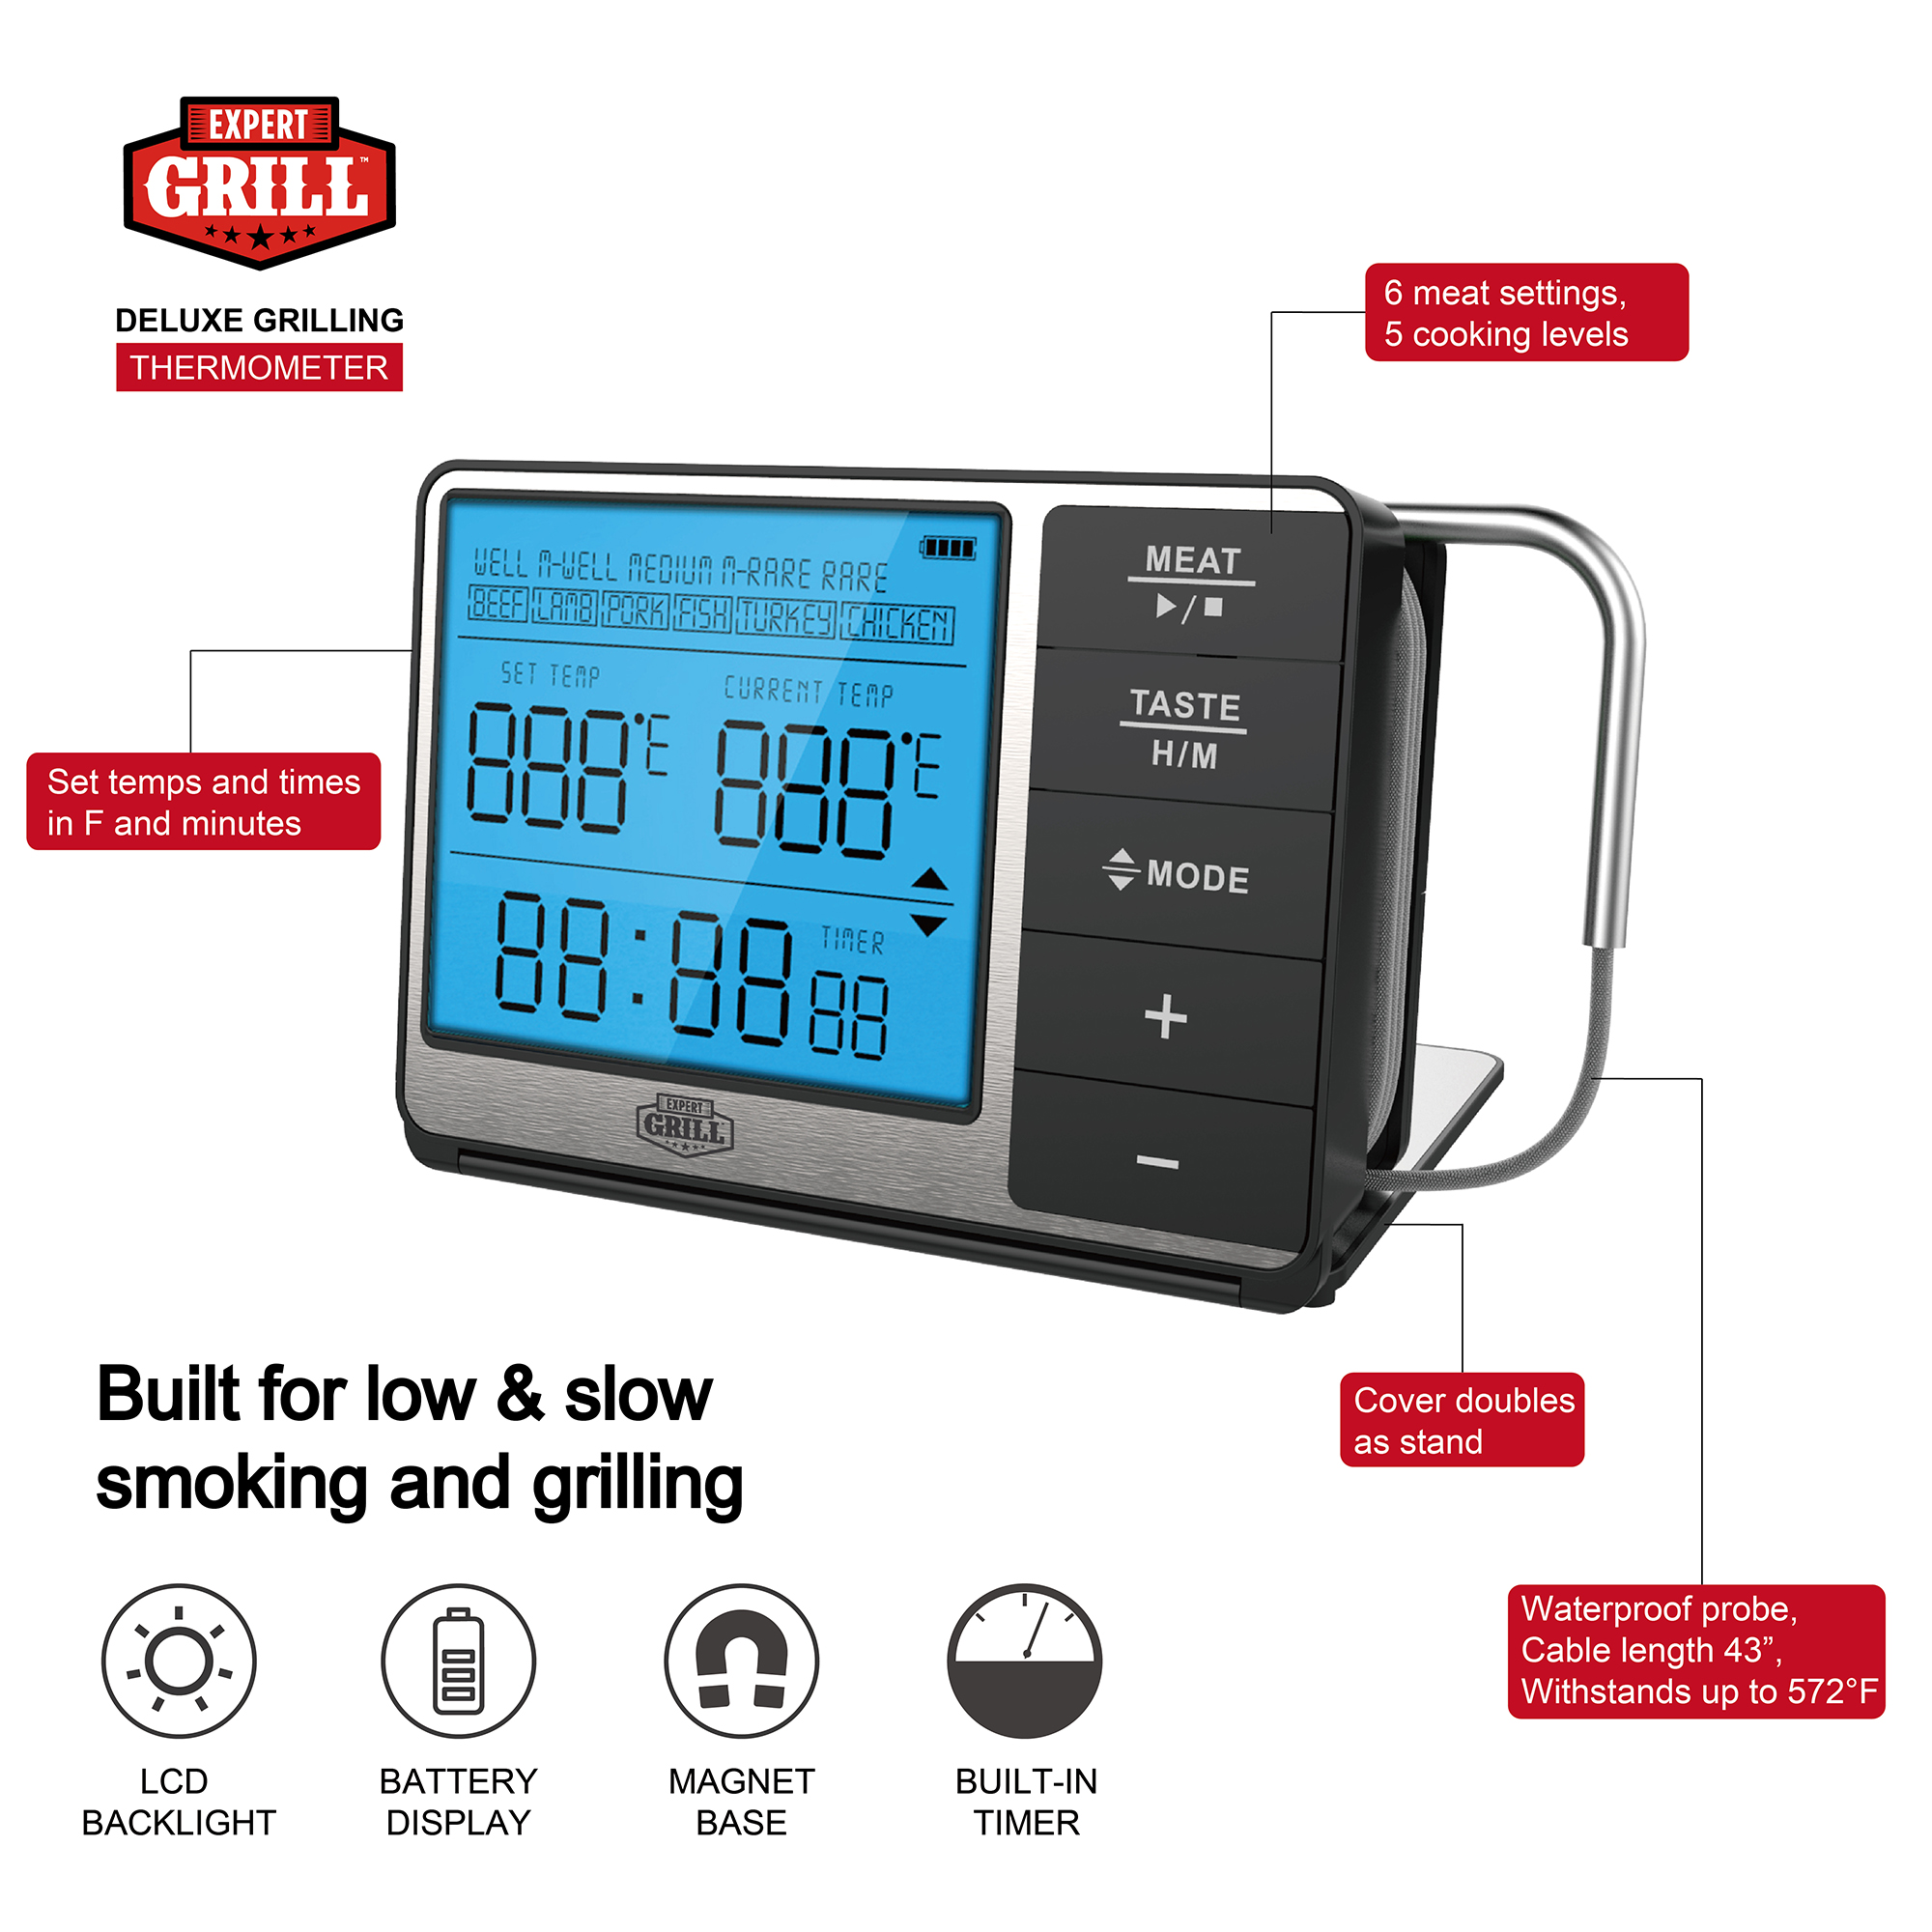 Expert Grill ABS Deluxe Digital BBQ Grilling Meat Thermometer - image 5 of 11